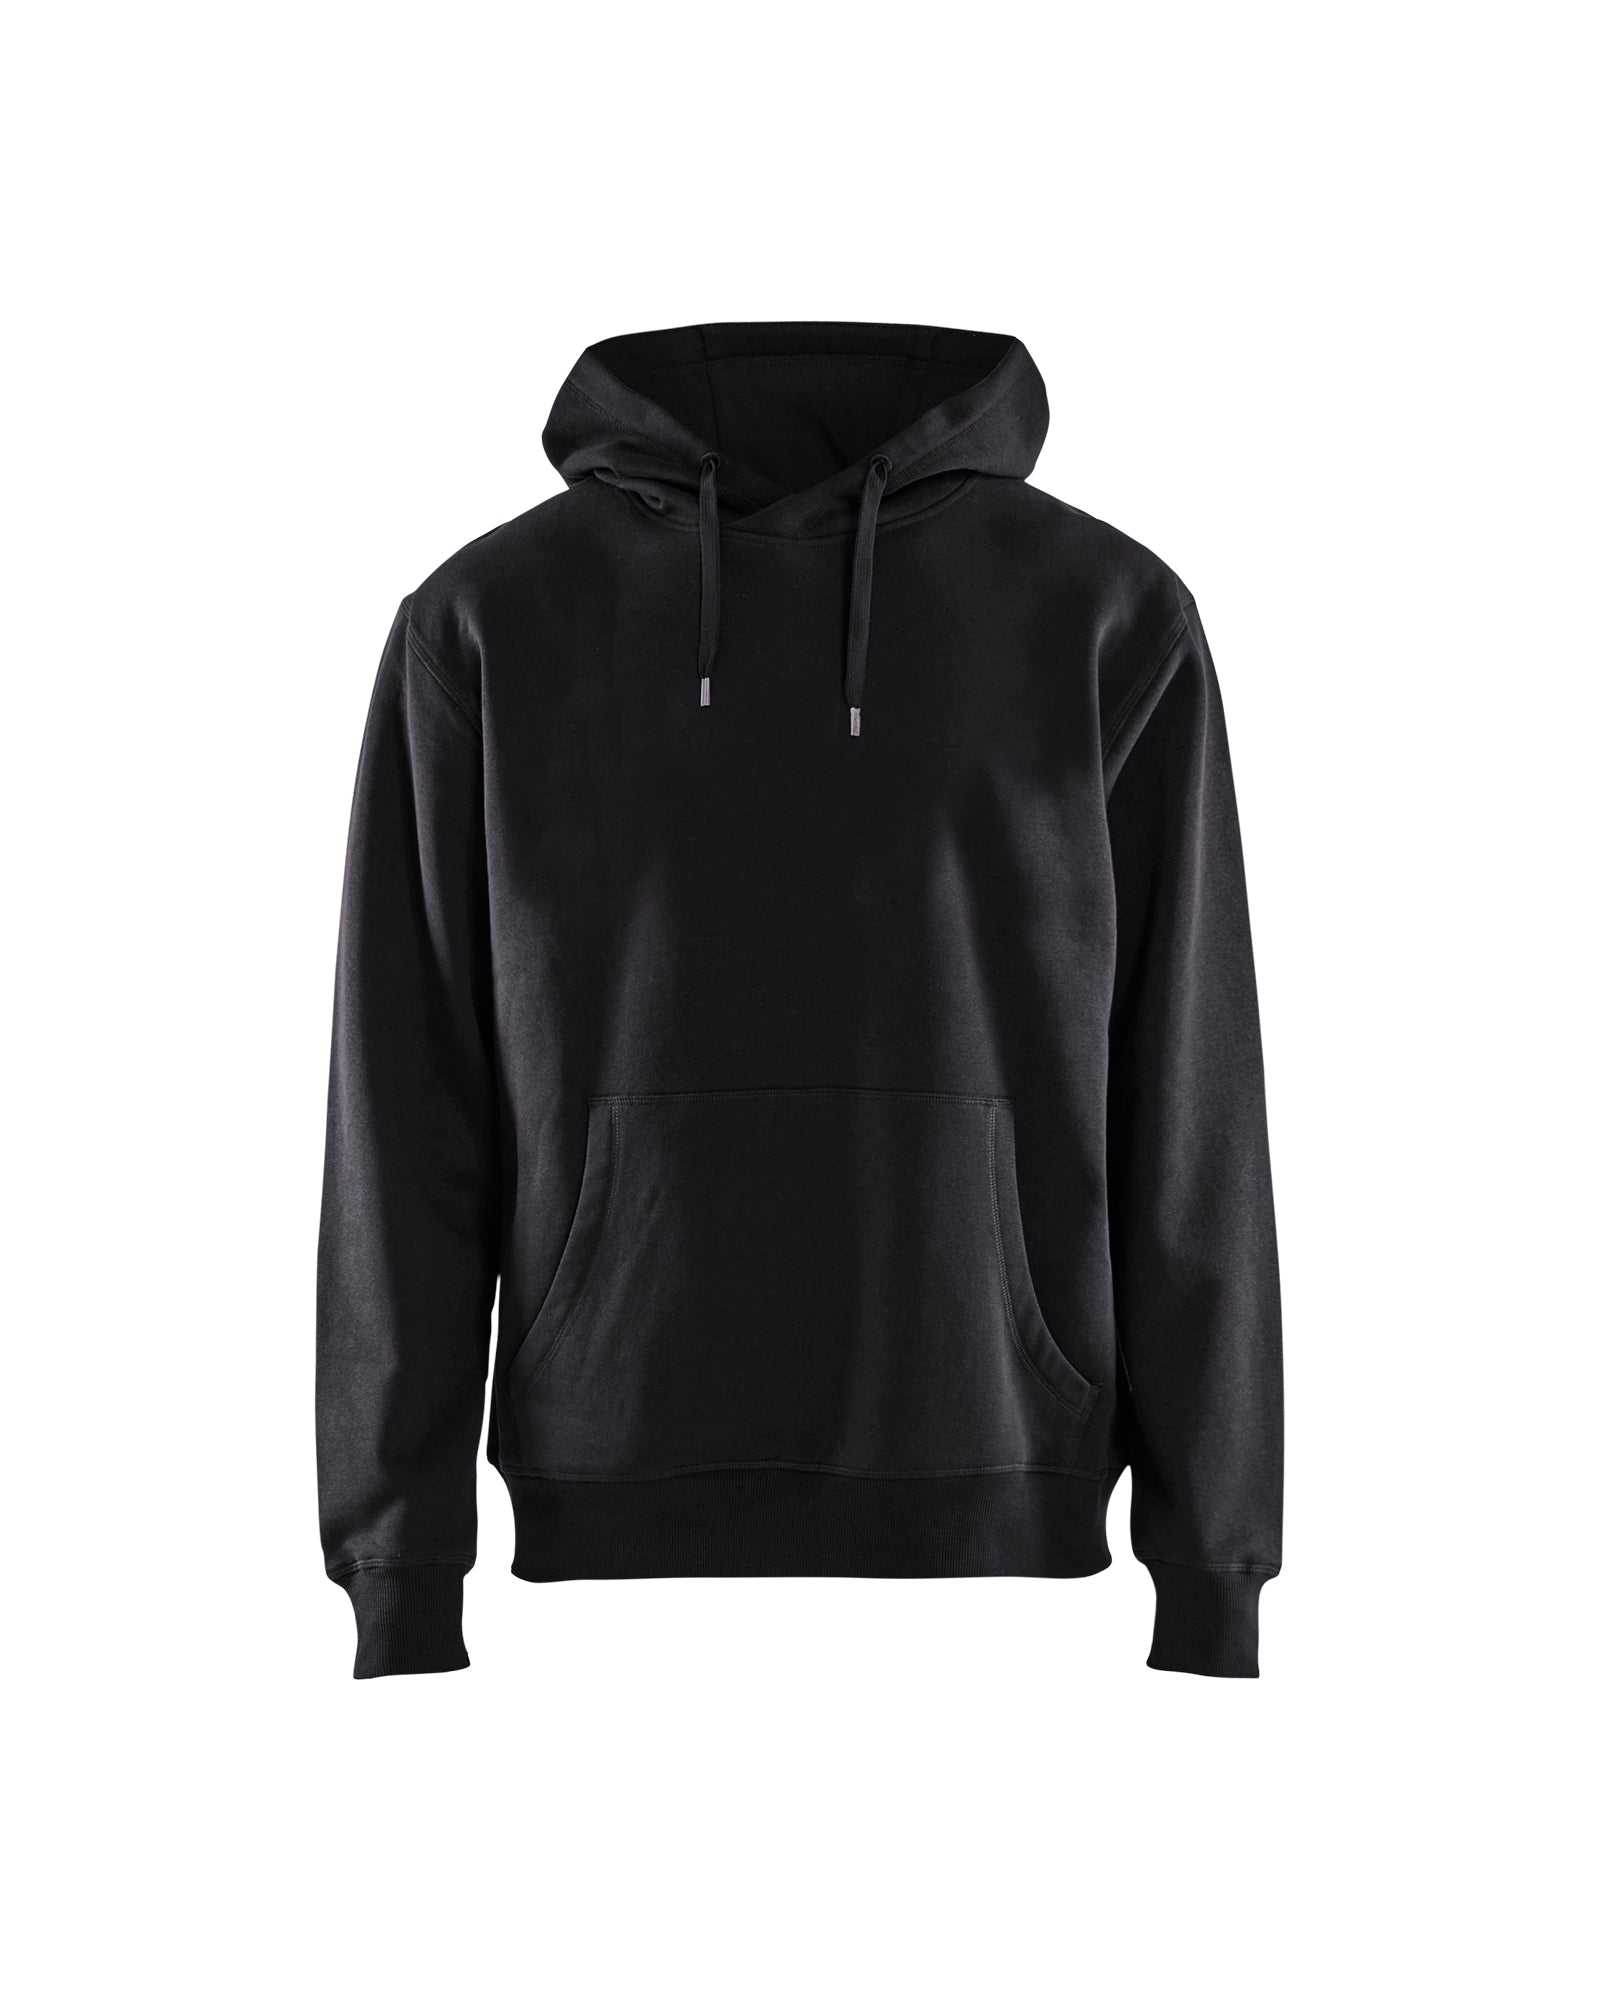 Men's Blaklader Hooded Sweatshirt in Black Profile from the front